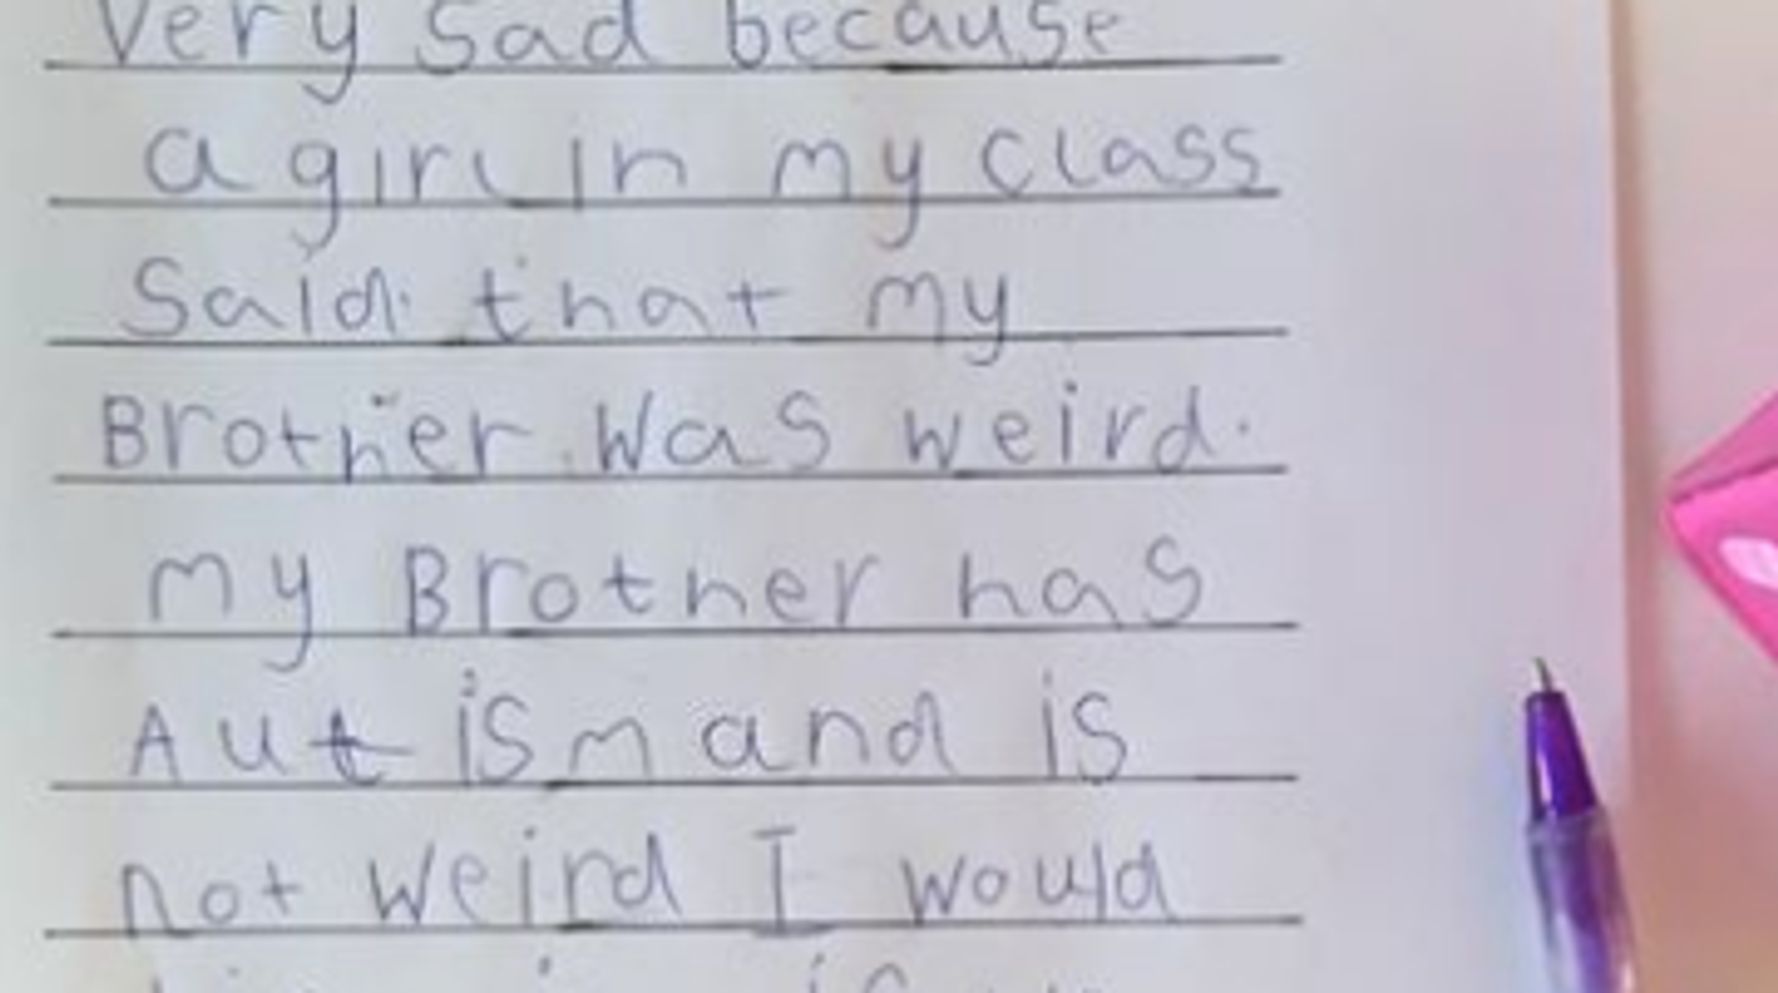 Six Year Old Writes Heartwarming Letter About Brother With Autism We